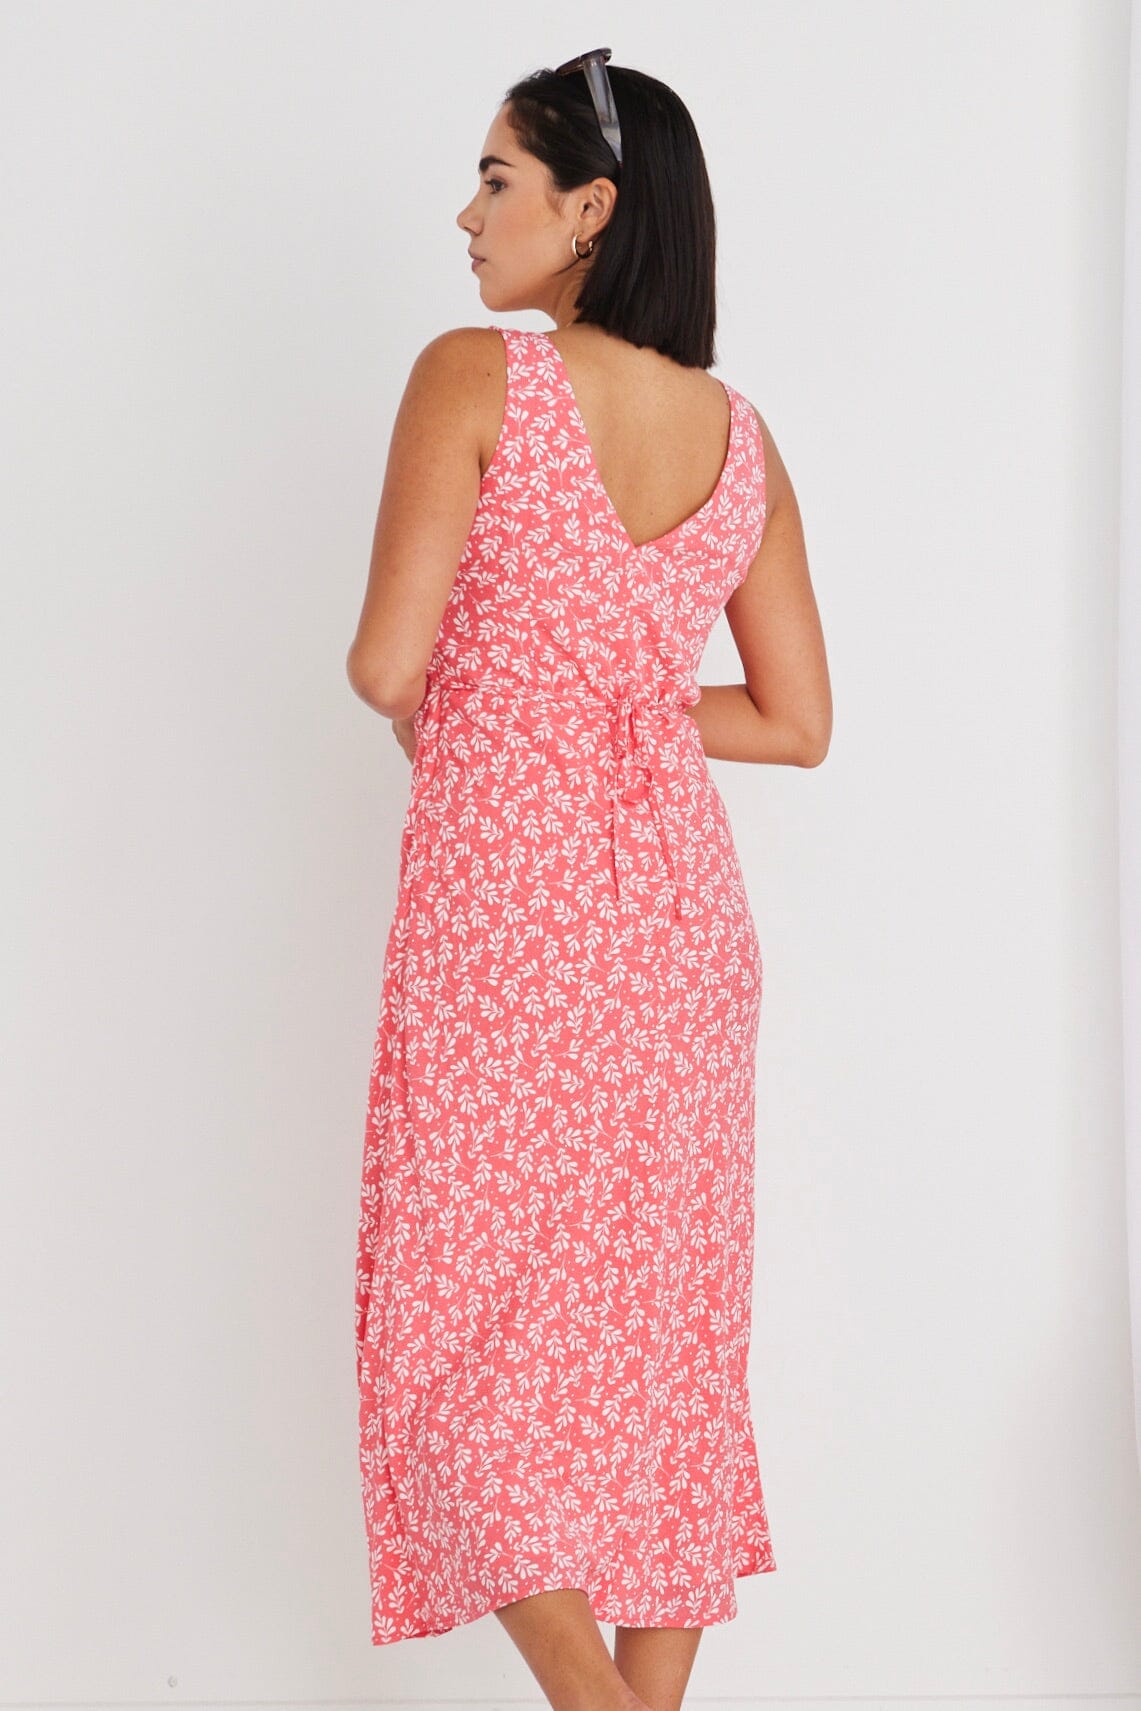 Stories Be Told - Astro Coral Twiggly Sleeveless Slim Fit Midi Dress - Orange Womens Stories Be Told